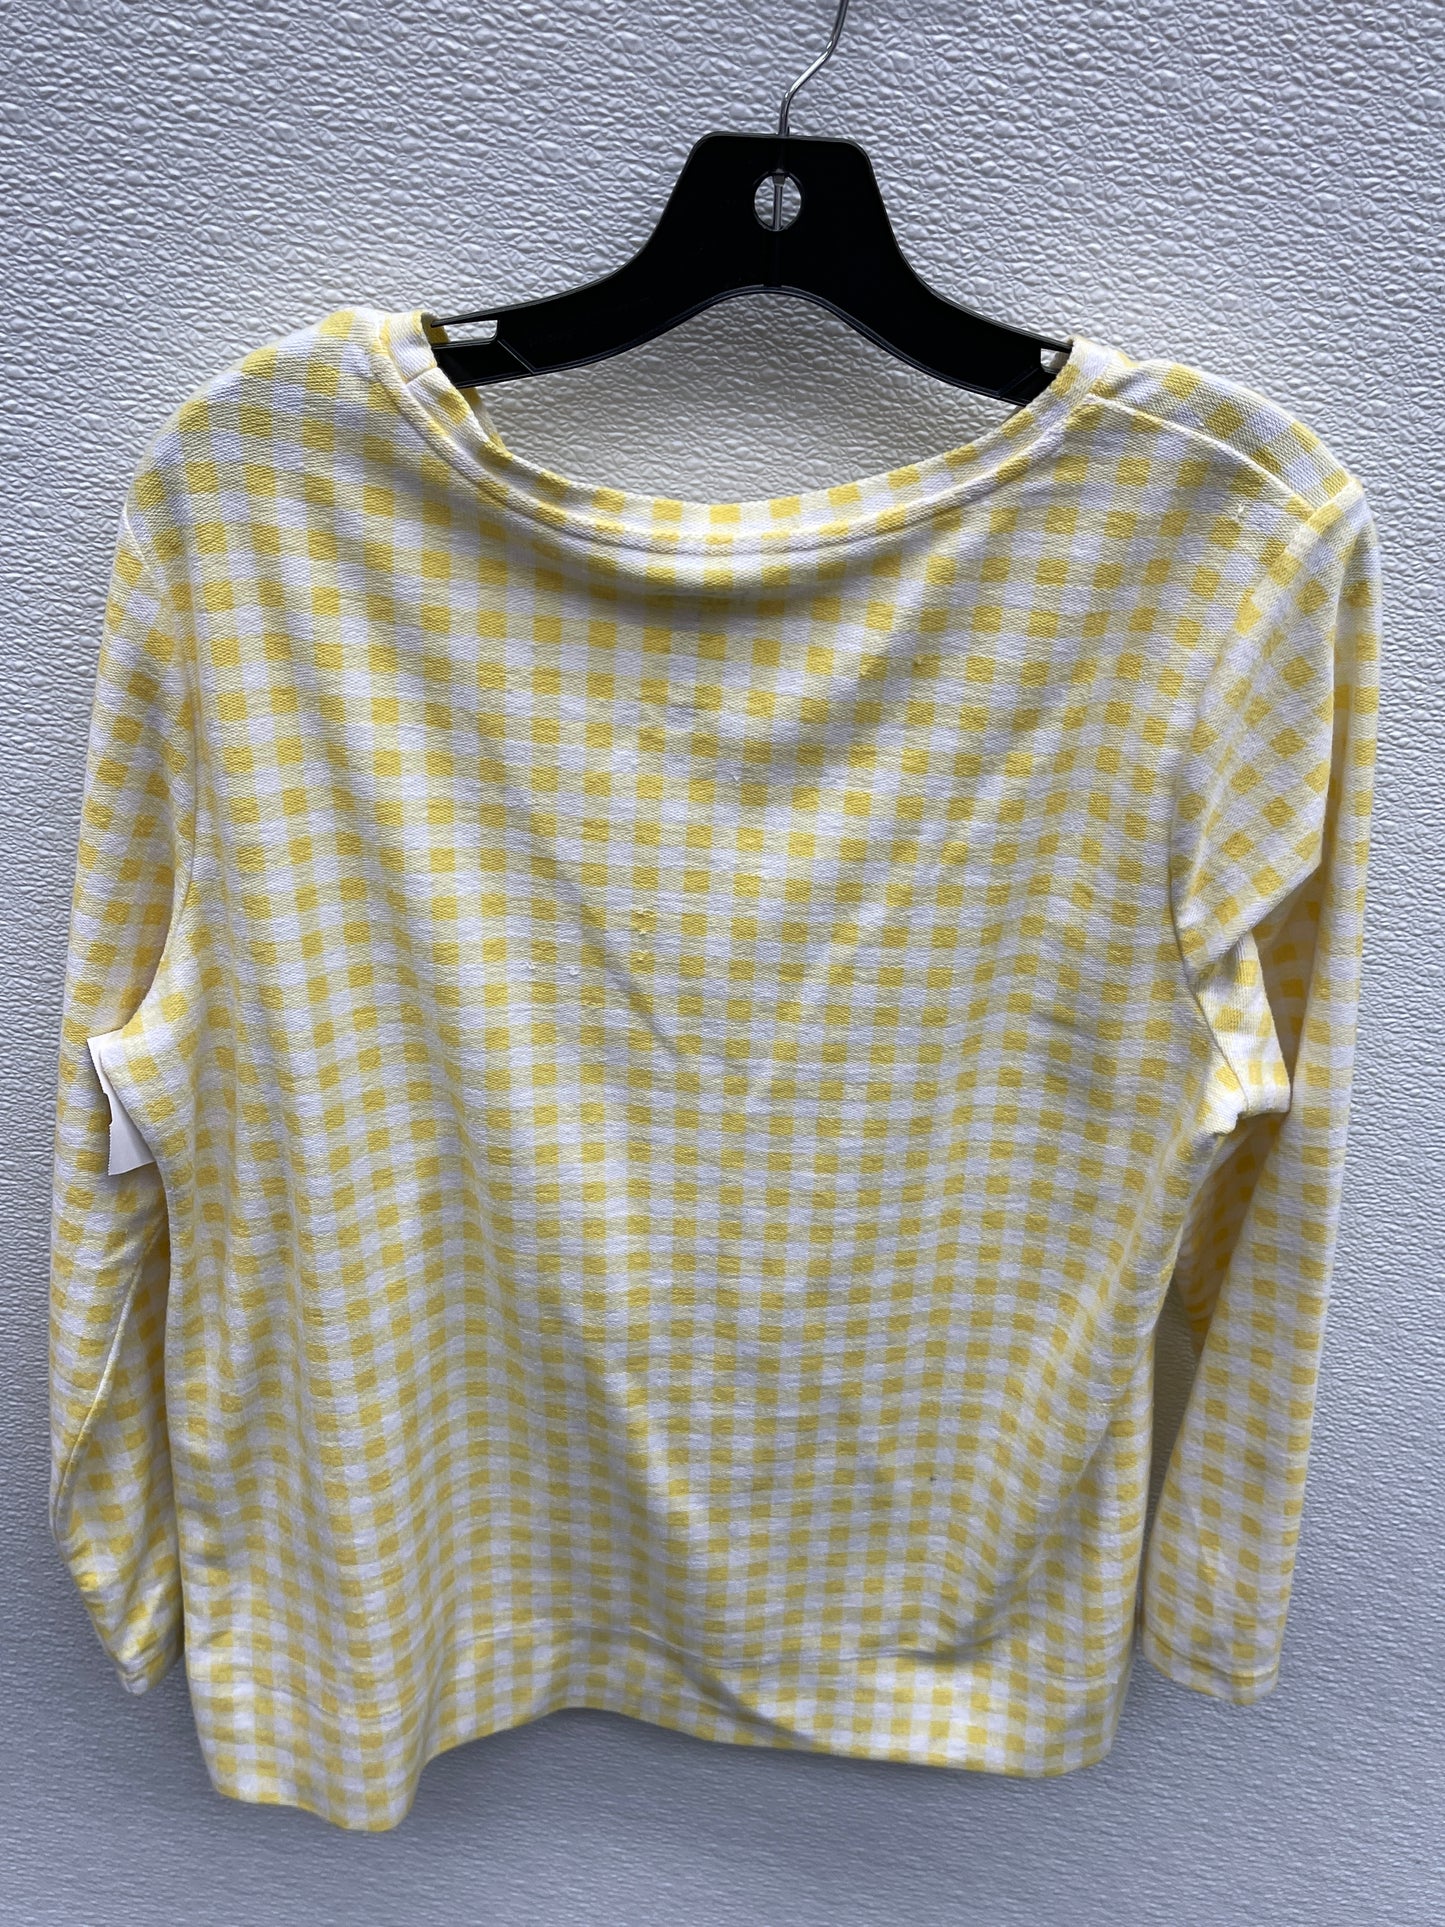 Sweater By Croft And Barrow  Size: L